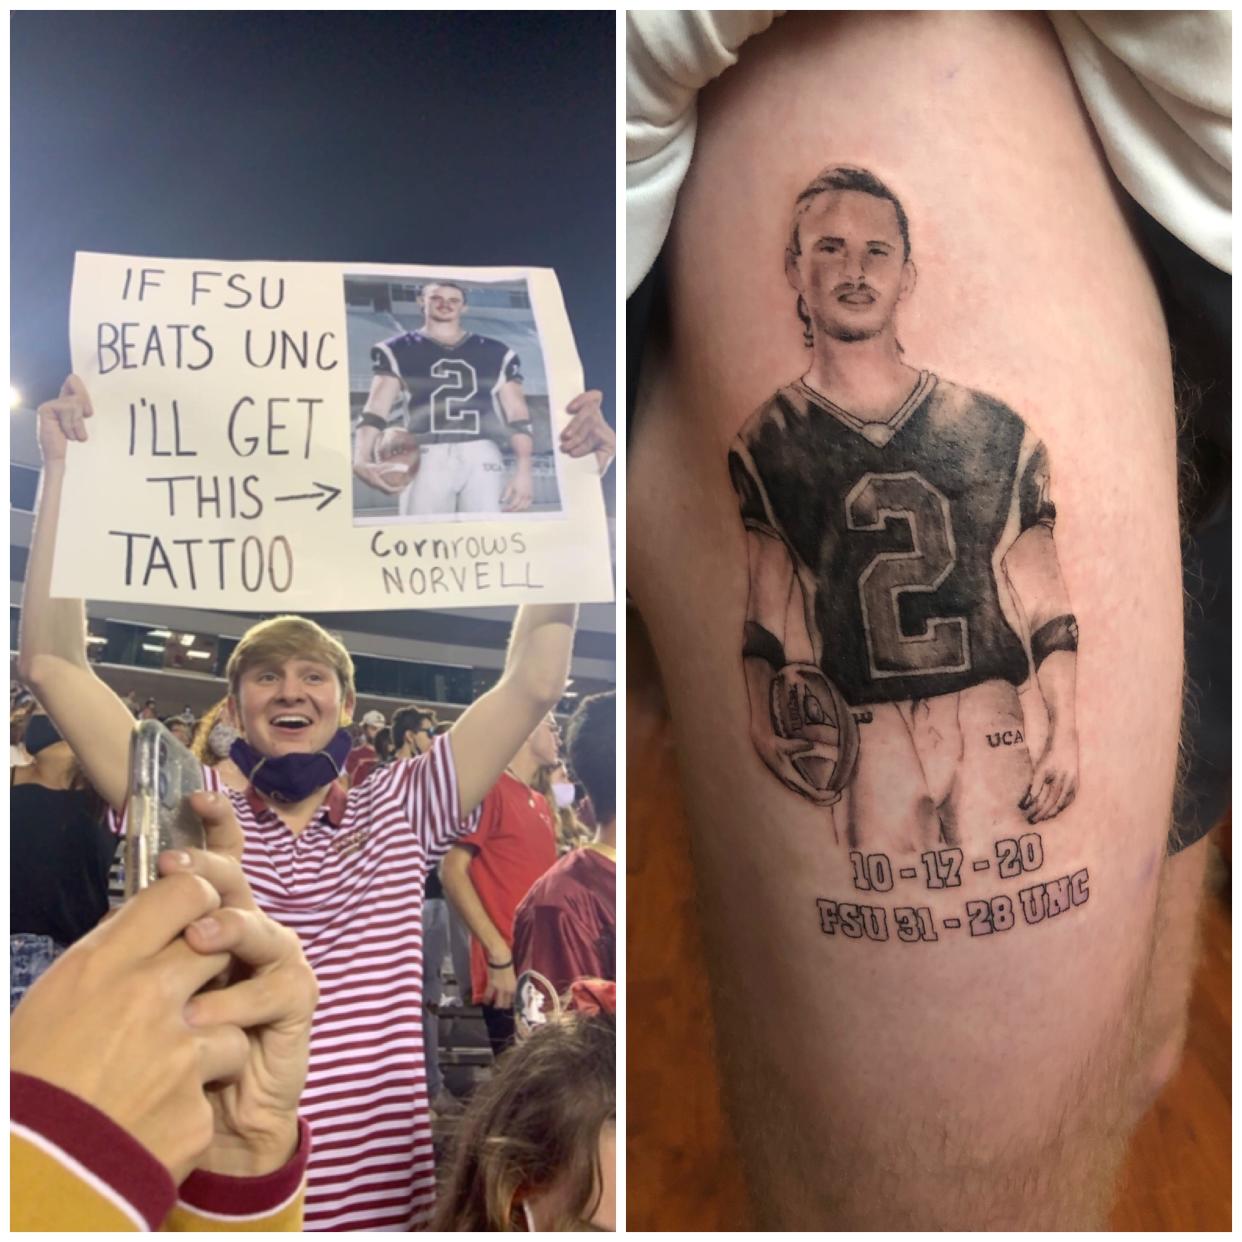 TCC student and lifelong FSU fan Jack Henyecz made good on his word over the weekend, getting a tattoo of FSU coach Mike Norvell’s cornrows photo.